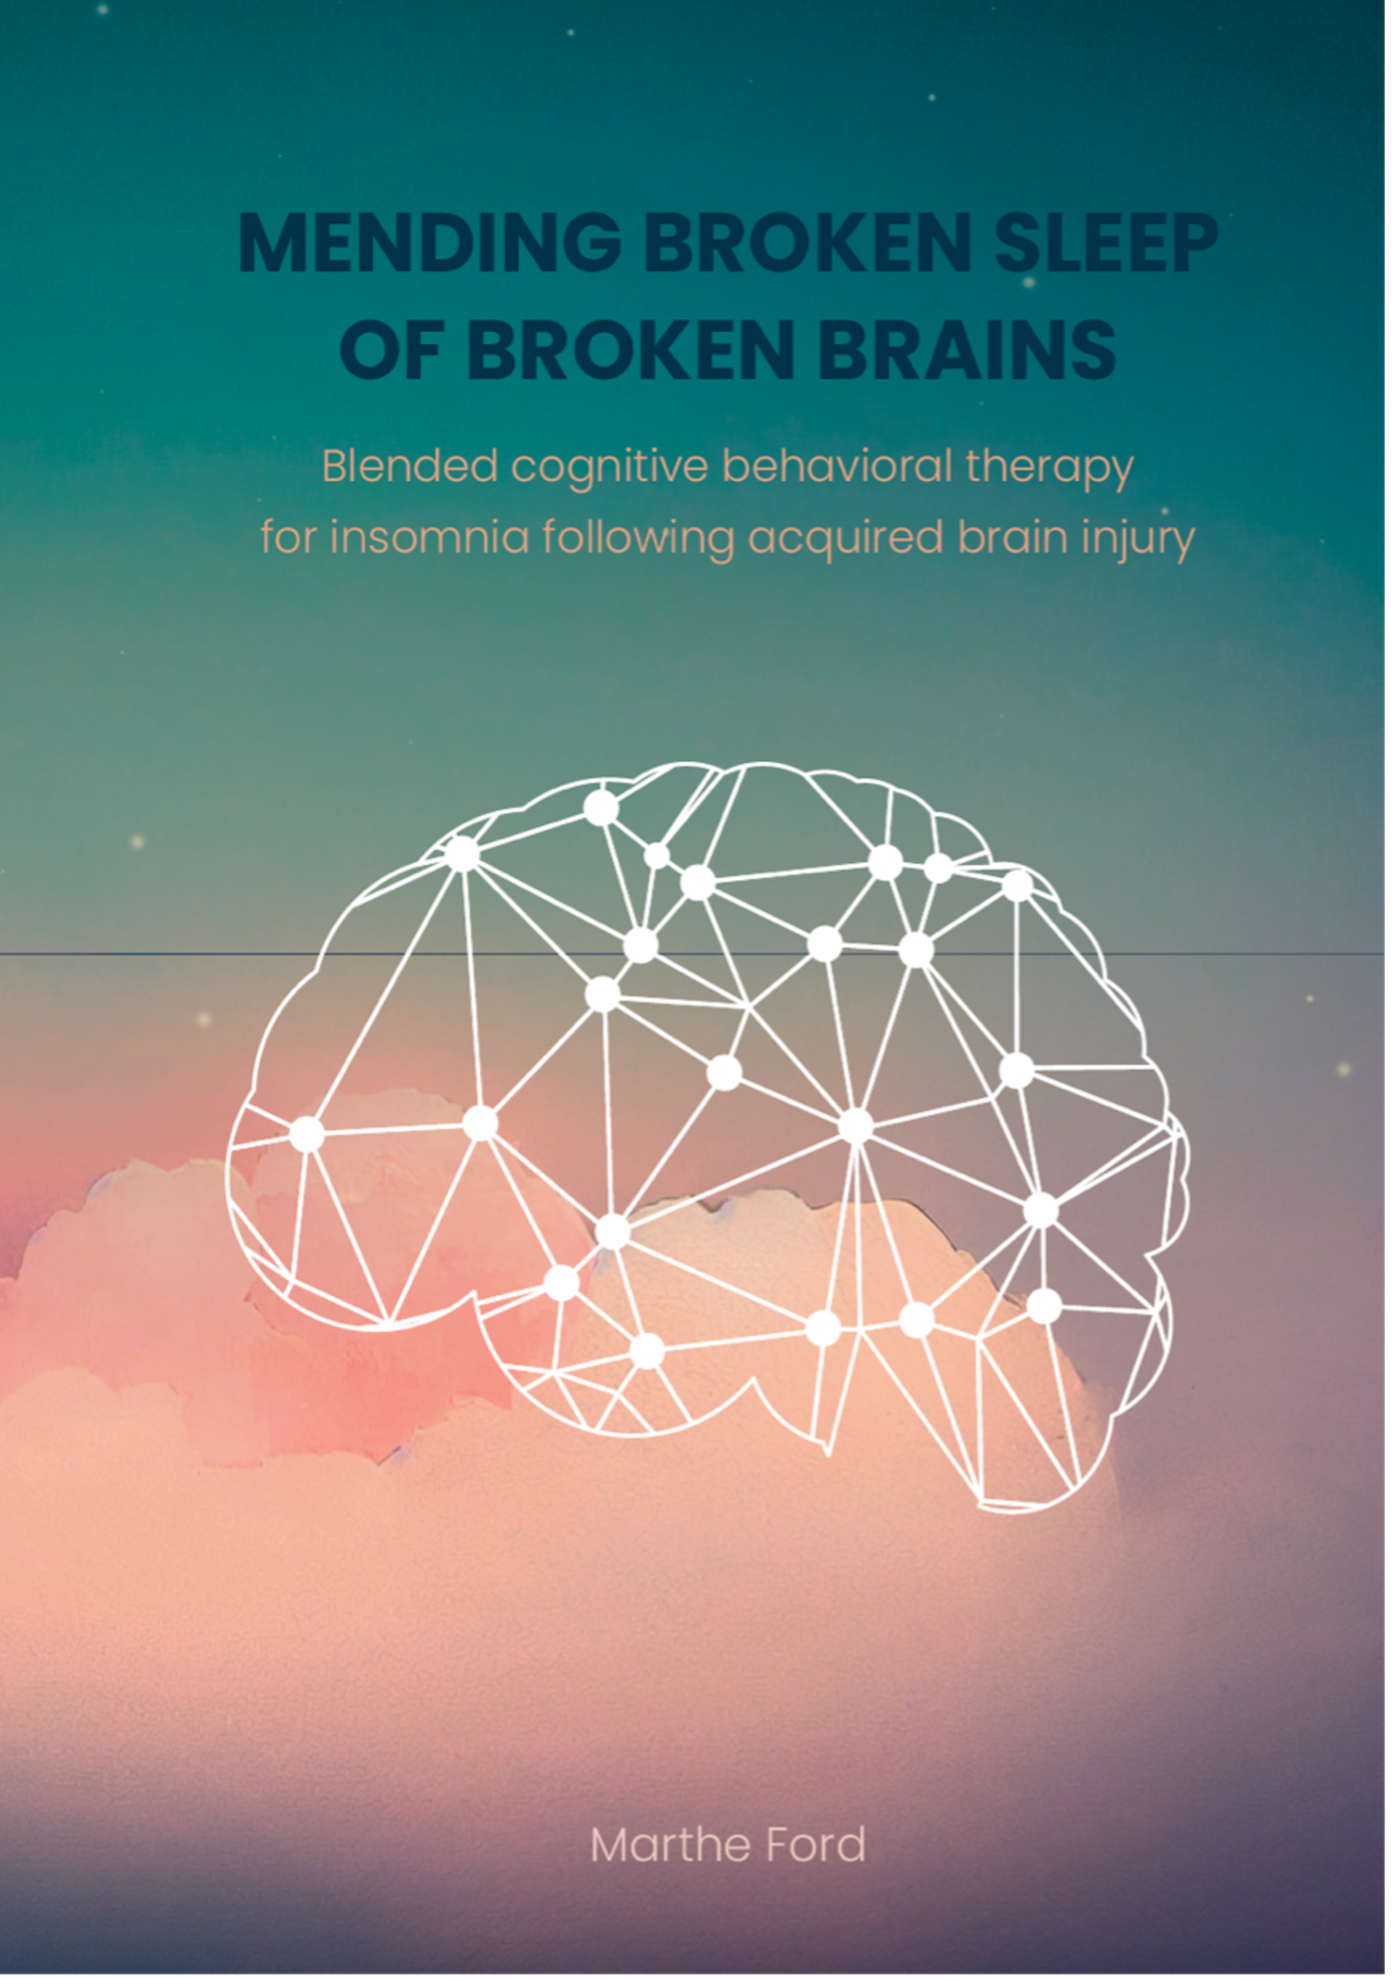 Mending broken sleep of broken brains: Blended cognitive behavioral therapy for insomnia following acquired brain injury door Marthe Ford